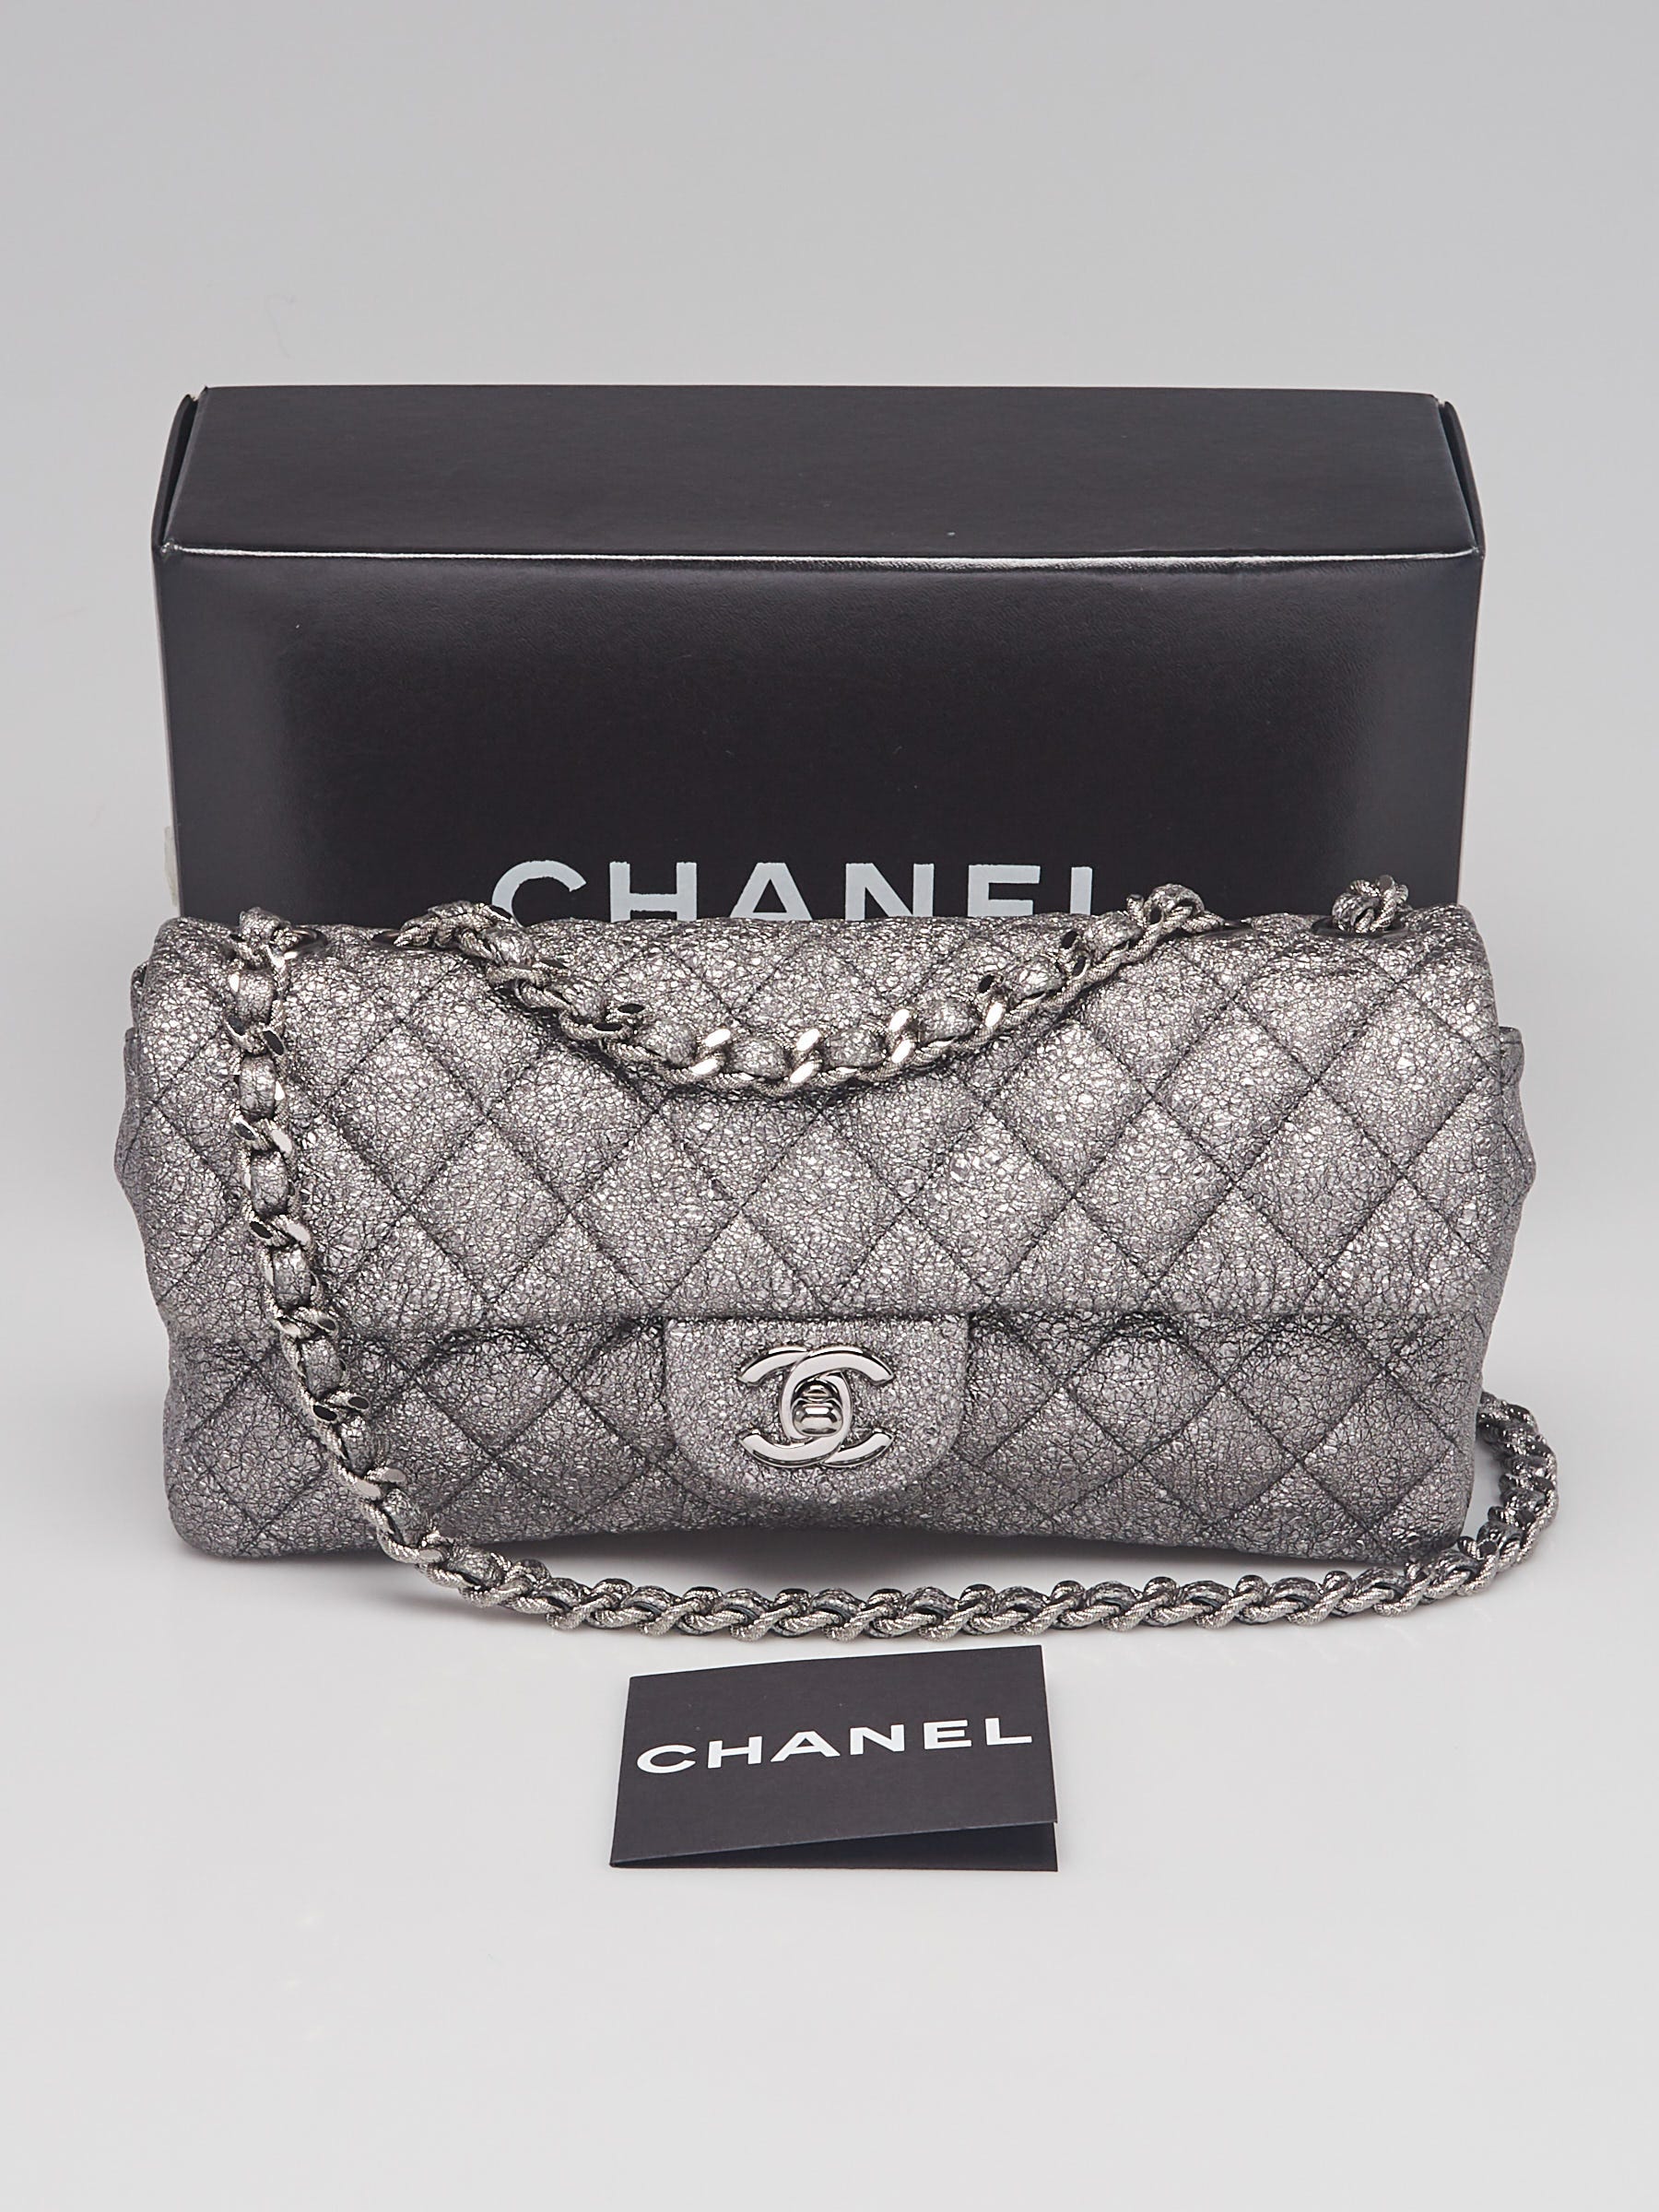 Chanel Silver Metallic Quilted Textured Leather East/West Flap Bag